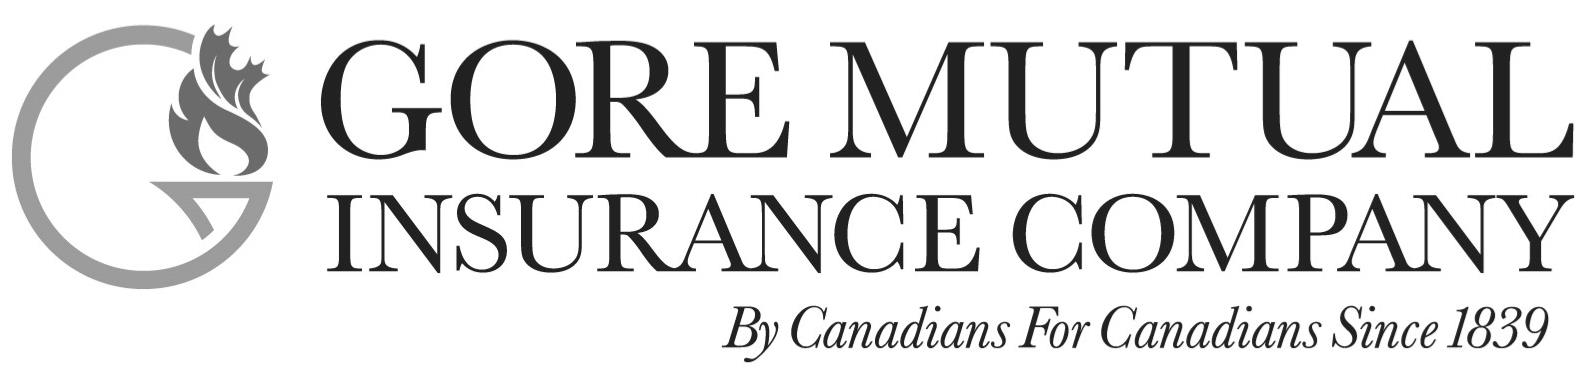  GORE MUTUAL INSURANCE COMPANY BY CANADIANS FOR CANADIANS SINCE 1839